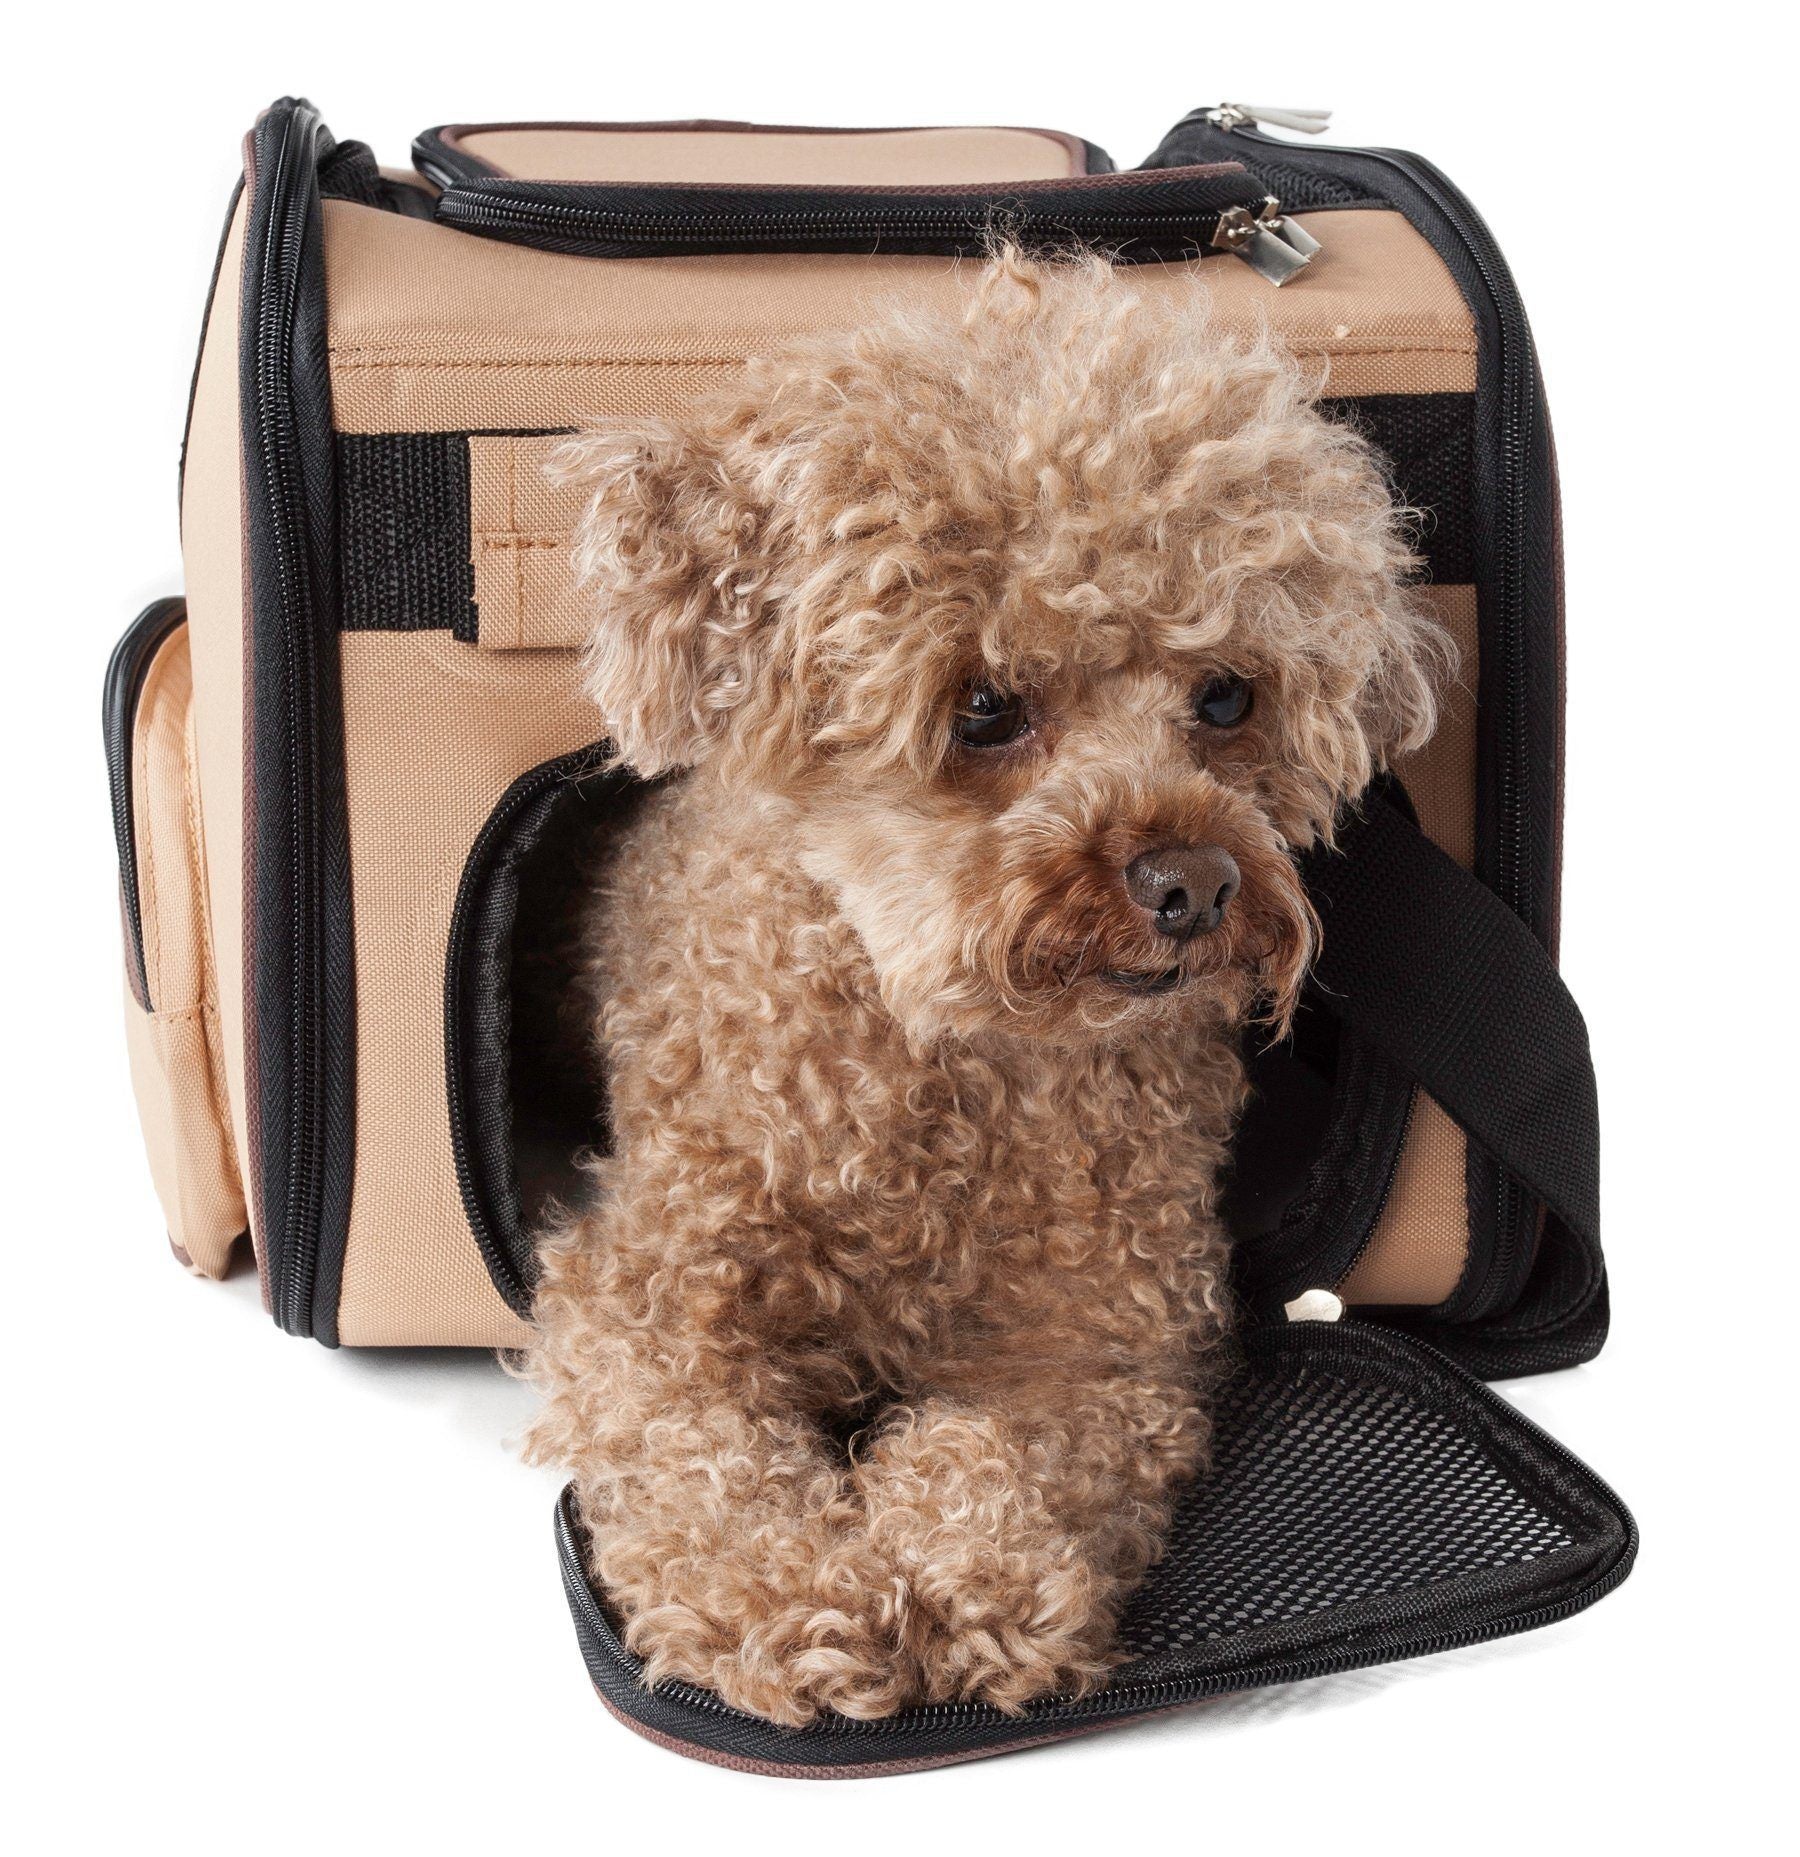 Pet Life ® 'Sky-Max' Airline Approved Designer Sporty Collapsible Travel Fashion Pet Dog Carrier  